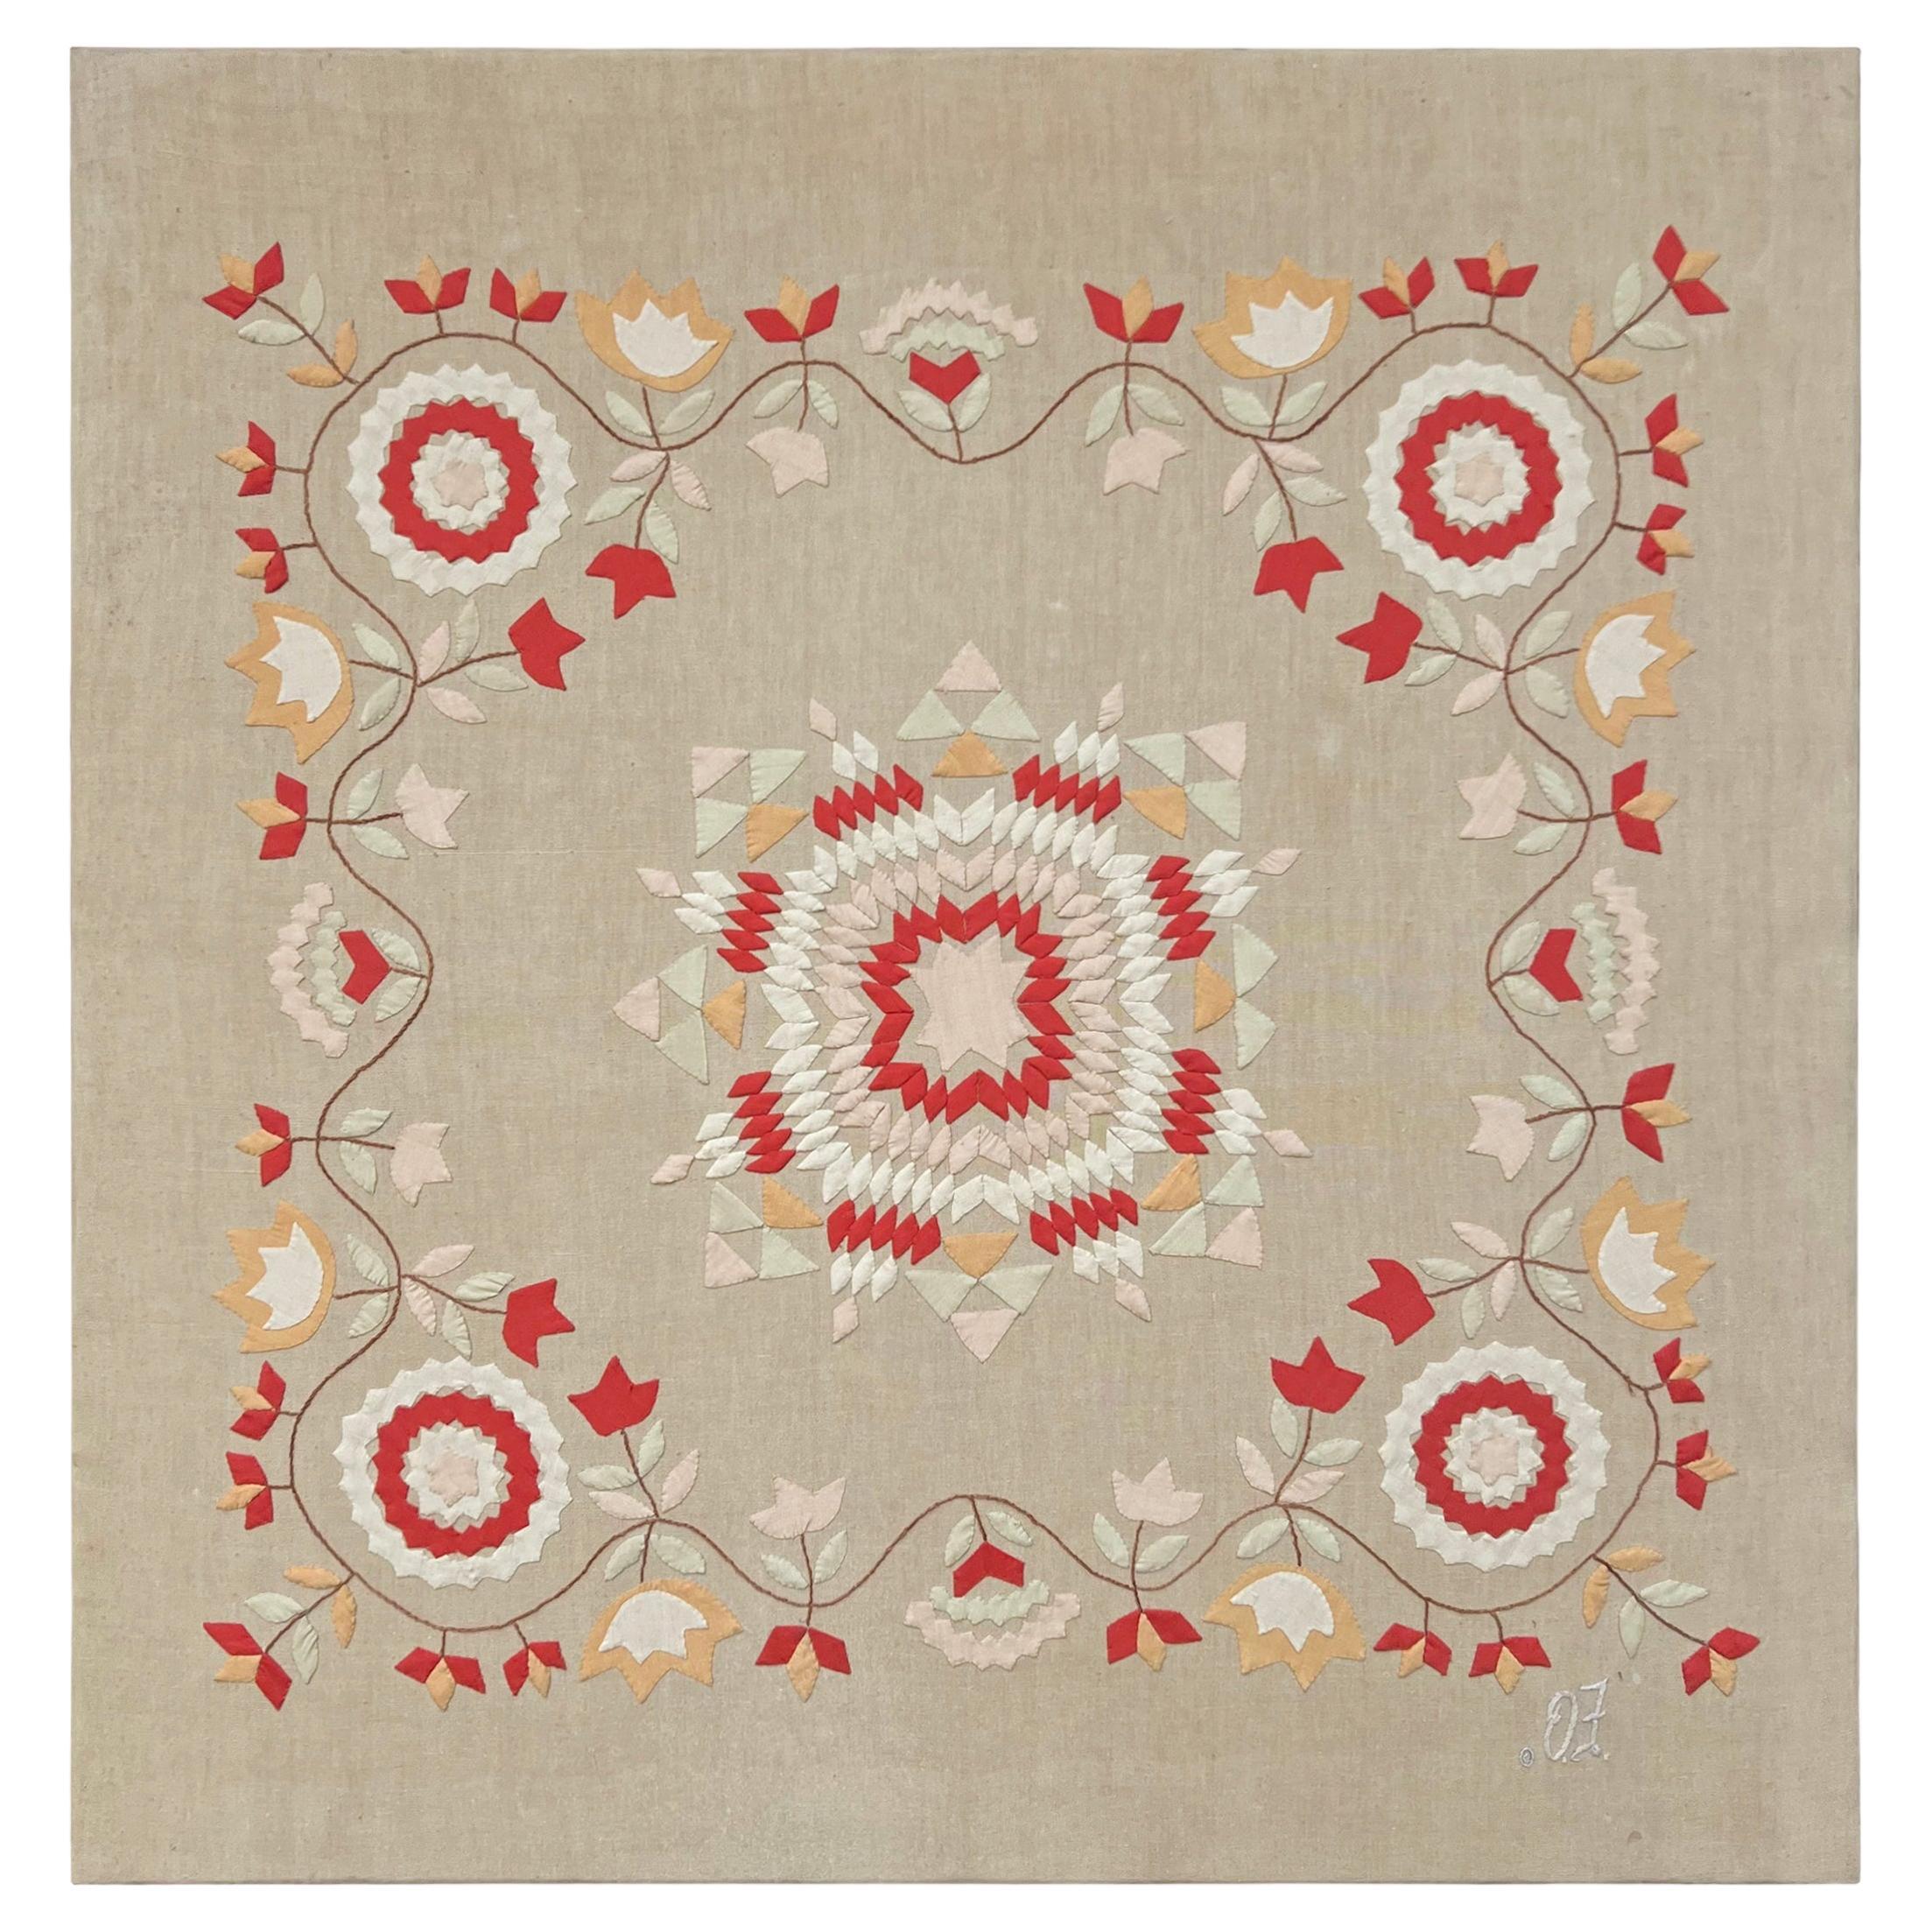 Mounted Late 19th Century American Appliqué Textile